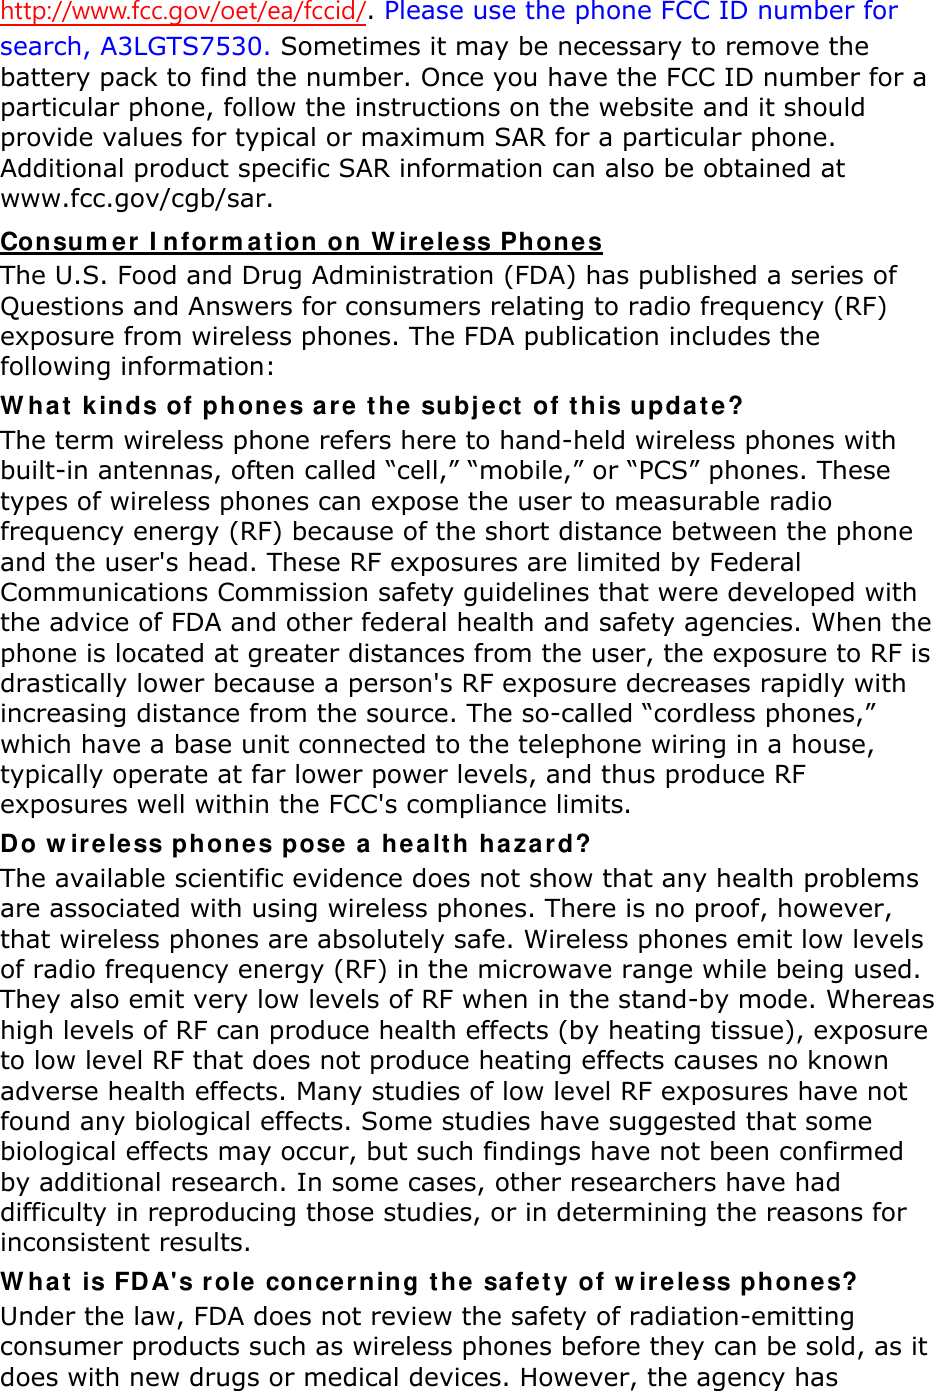 http://www.fcc.gov/oet/ea/fccid/. Please use the phone FCC ID number for search, A3LGTS7530. Sometimes it may be necessary to remove the battery pack to find the number. Once you have the FCC ID number for a particular phone, follow the instructions on the website and it should provide values for typical or maximum SAR for a particular phone. Additional product specific SAR information can also be obtained at www.fcc.gov/cgb/sar. Consumer Information on Wireless Phones The U.S. Food and Drug Administration (FDA) has published a series of Questions and Answers for consumers relating to radio frequency (RF) exposure from wireless phones. The FDA publication includes the following information: What kinds of phones are the subject of this update? The term wireless phone refers here to hand-held wireless phones with built-in antennas, often called “cell,” “mobile,” or “PCS” phones. These types of wireless phones can expose the user to measurable radio frequency energy (RF) because of the short distance between the phone and the user&apos;s head. These RF exposures are limited by Federal Communications Commission safety guidelines that were developed with the advice of FDA and other federal health and safety agencies. When the phone is located at greater distances from the user, the exposure to RF is drastically lower because a person&apos;s RF exposure decreases rapidly with increasing distance from the source. The so-called “cordless phones,” which have a base unit connected to the telephone wiring in a house, typically operate at far lower power levels, and thus produce RF exposures well within the FCC&apos;s compliance limits. Do wireless phones pose a health hazard? The available scientific evidence does not show that any health problems are associated with using wireless phones. There is no proof, however, that wireless phones are absolutely safe. Wireless phones emit low levels of radio frequency energy (RF) in the microwave range while being used. They also emit very low levels of RF when in the stand-by mode. Whereas high levels of RF can produce health effects (by heating tissue), exposure to low level RF that does not produce heating effects causes no known adverse health effects. Many studies of low level RF exposures have not found any biological effects. Some studies have suggested that some biological effects may occur, but such findings have not been confirmed by additional research. In some cases, other researchers have had difficulty in reproducing those studies, or in determining the reasons for inconsistent results. What is FDA&apos;s role concerning the safety of wireless phones? Under the law, FDA does not review the safety of radiation-emitting consumer products such as wireless phones before they can be sold, as it does with new drugs or medical devices. However, the agency has 